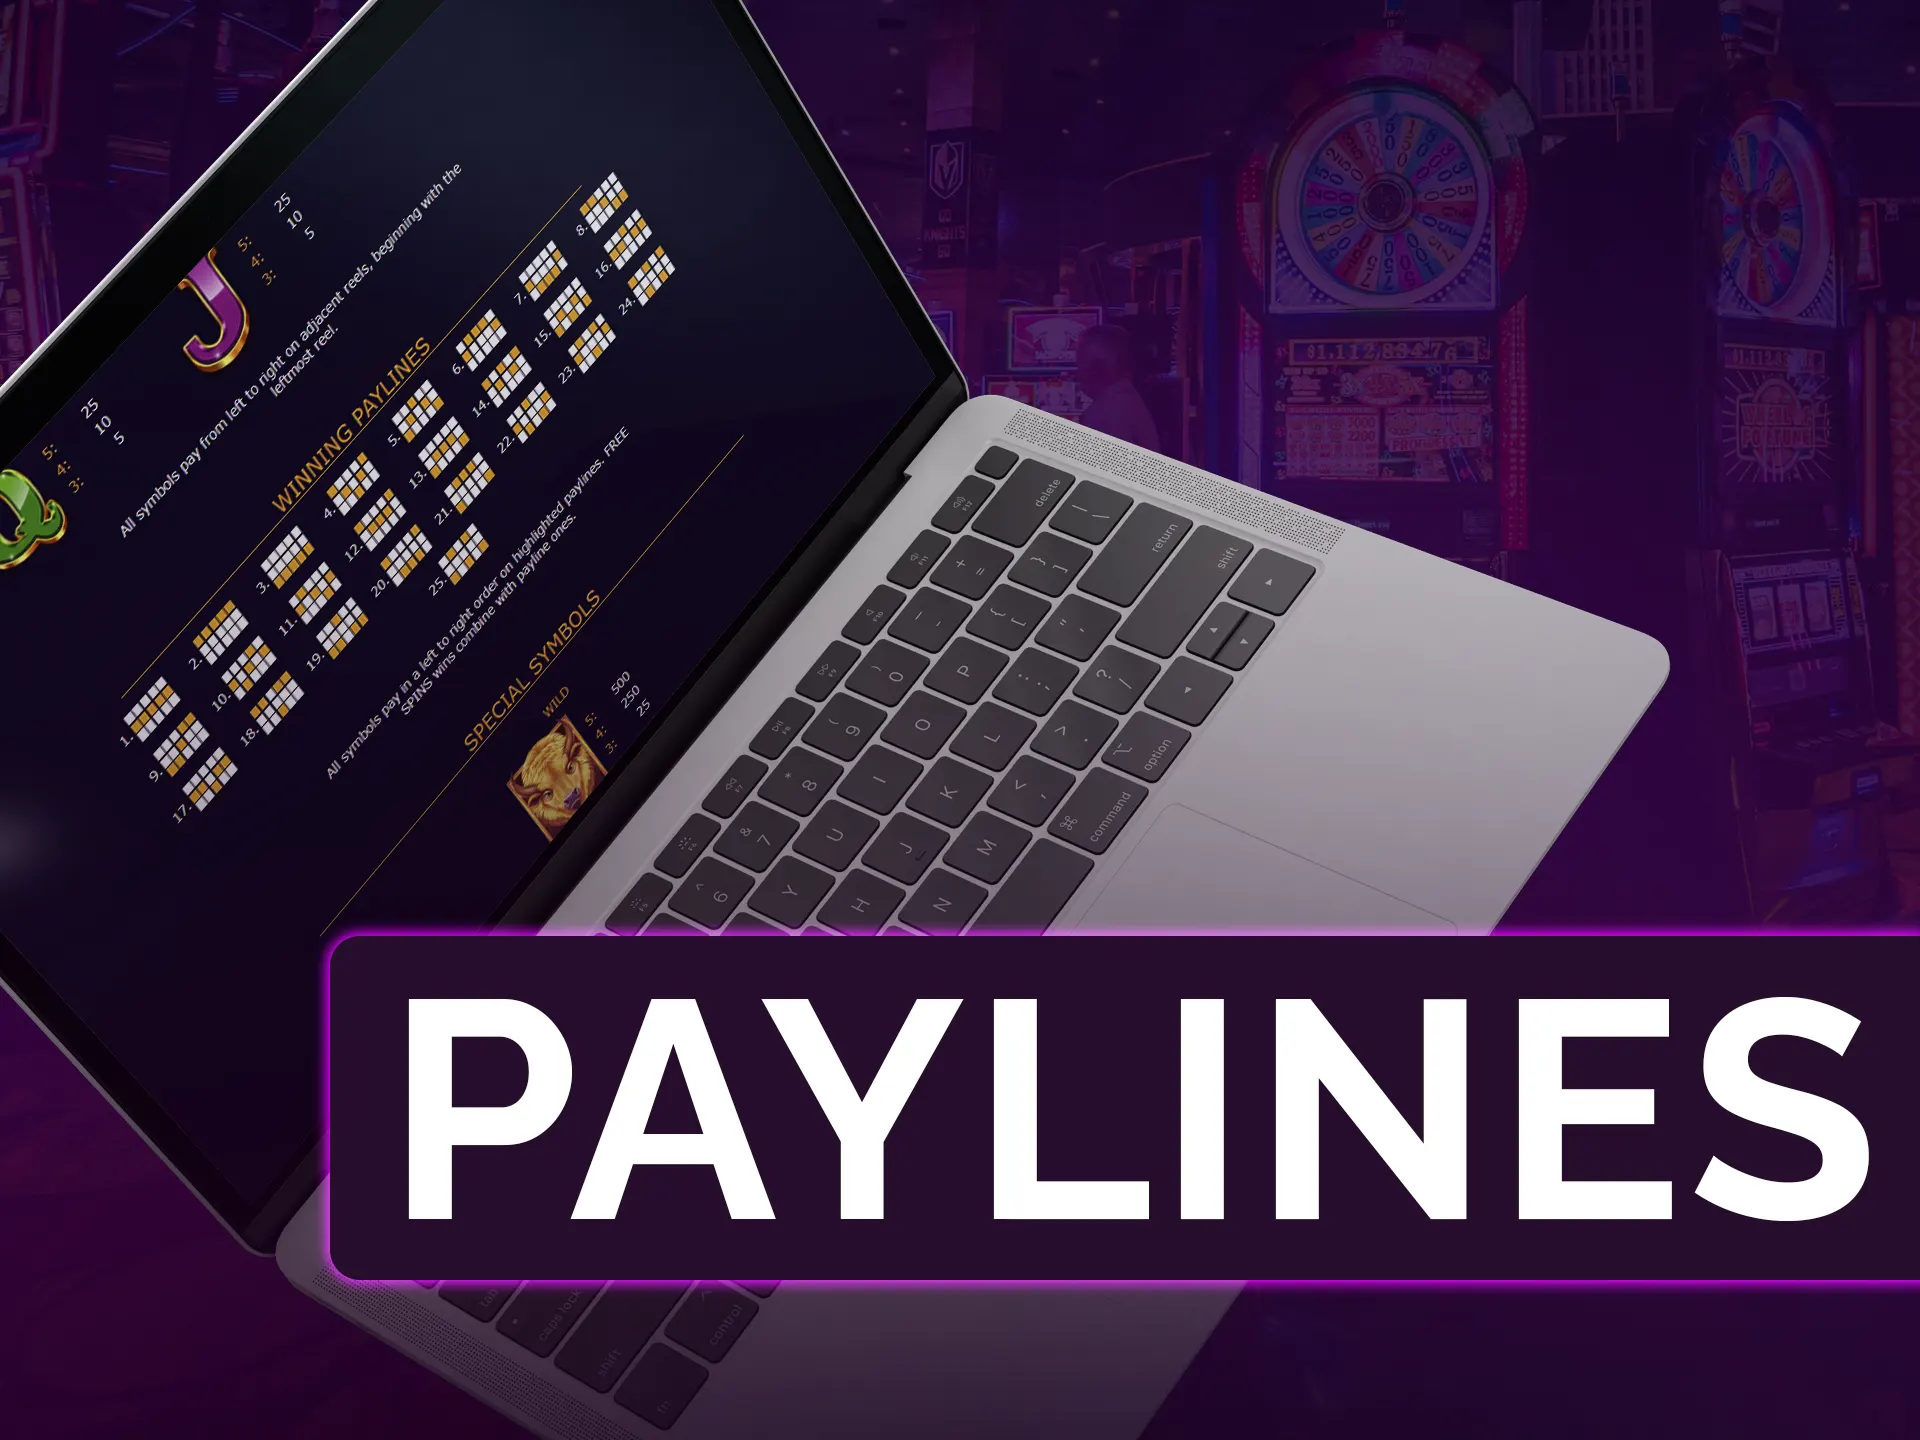 Paylines are symbol strings on reels, determining wins in slot machines.